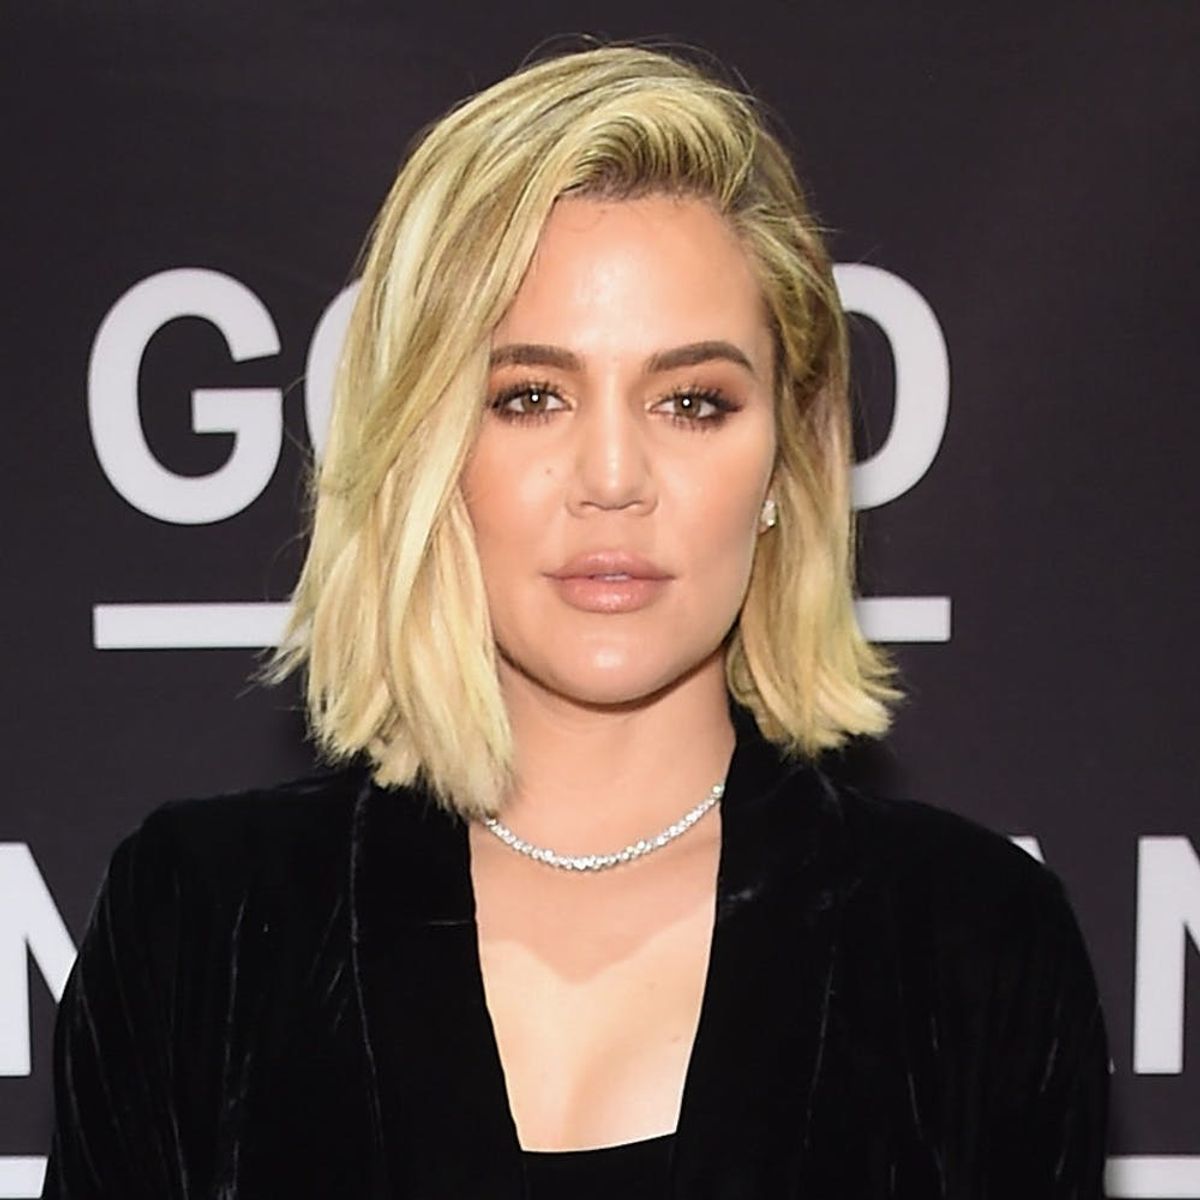 This ‘KUWTK’ Trailer Has Fans Thinking Khloé Kardashian Is About to Reveal Her Pregnancy